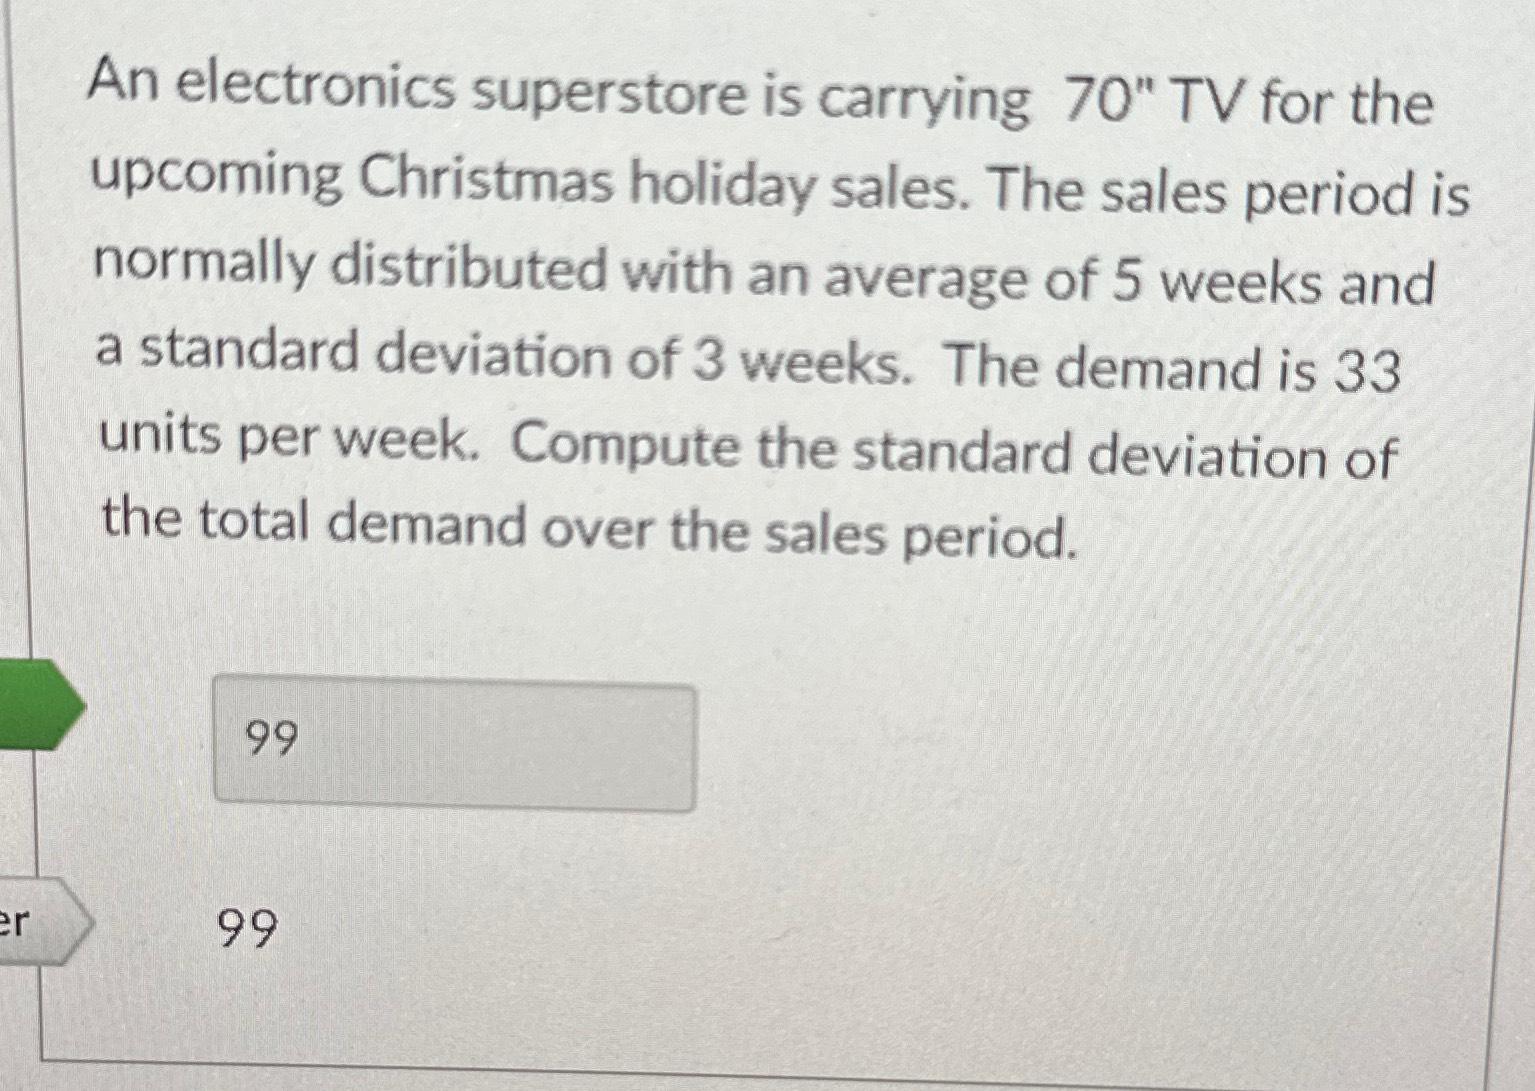 er An electronics superstore is carrying 70